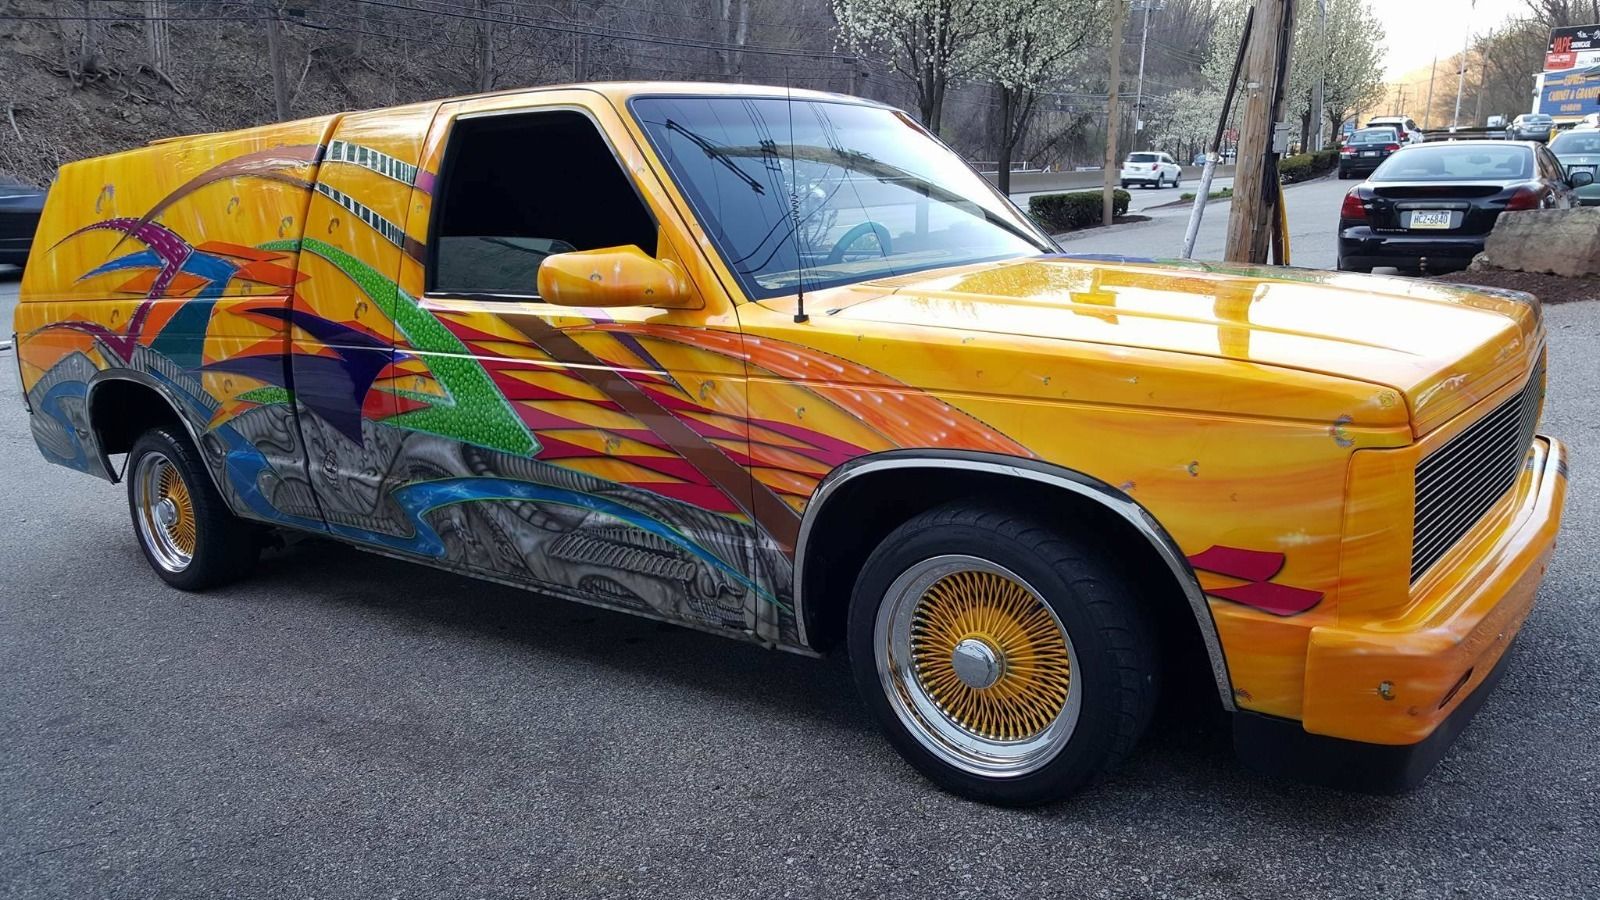 Holy Mother of Airbrushing: Is This GMC S-15 Lowrider A Classic Or Just An Old Trend Throwback?